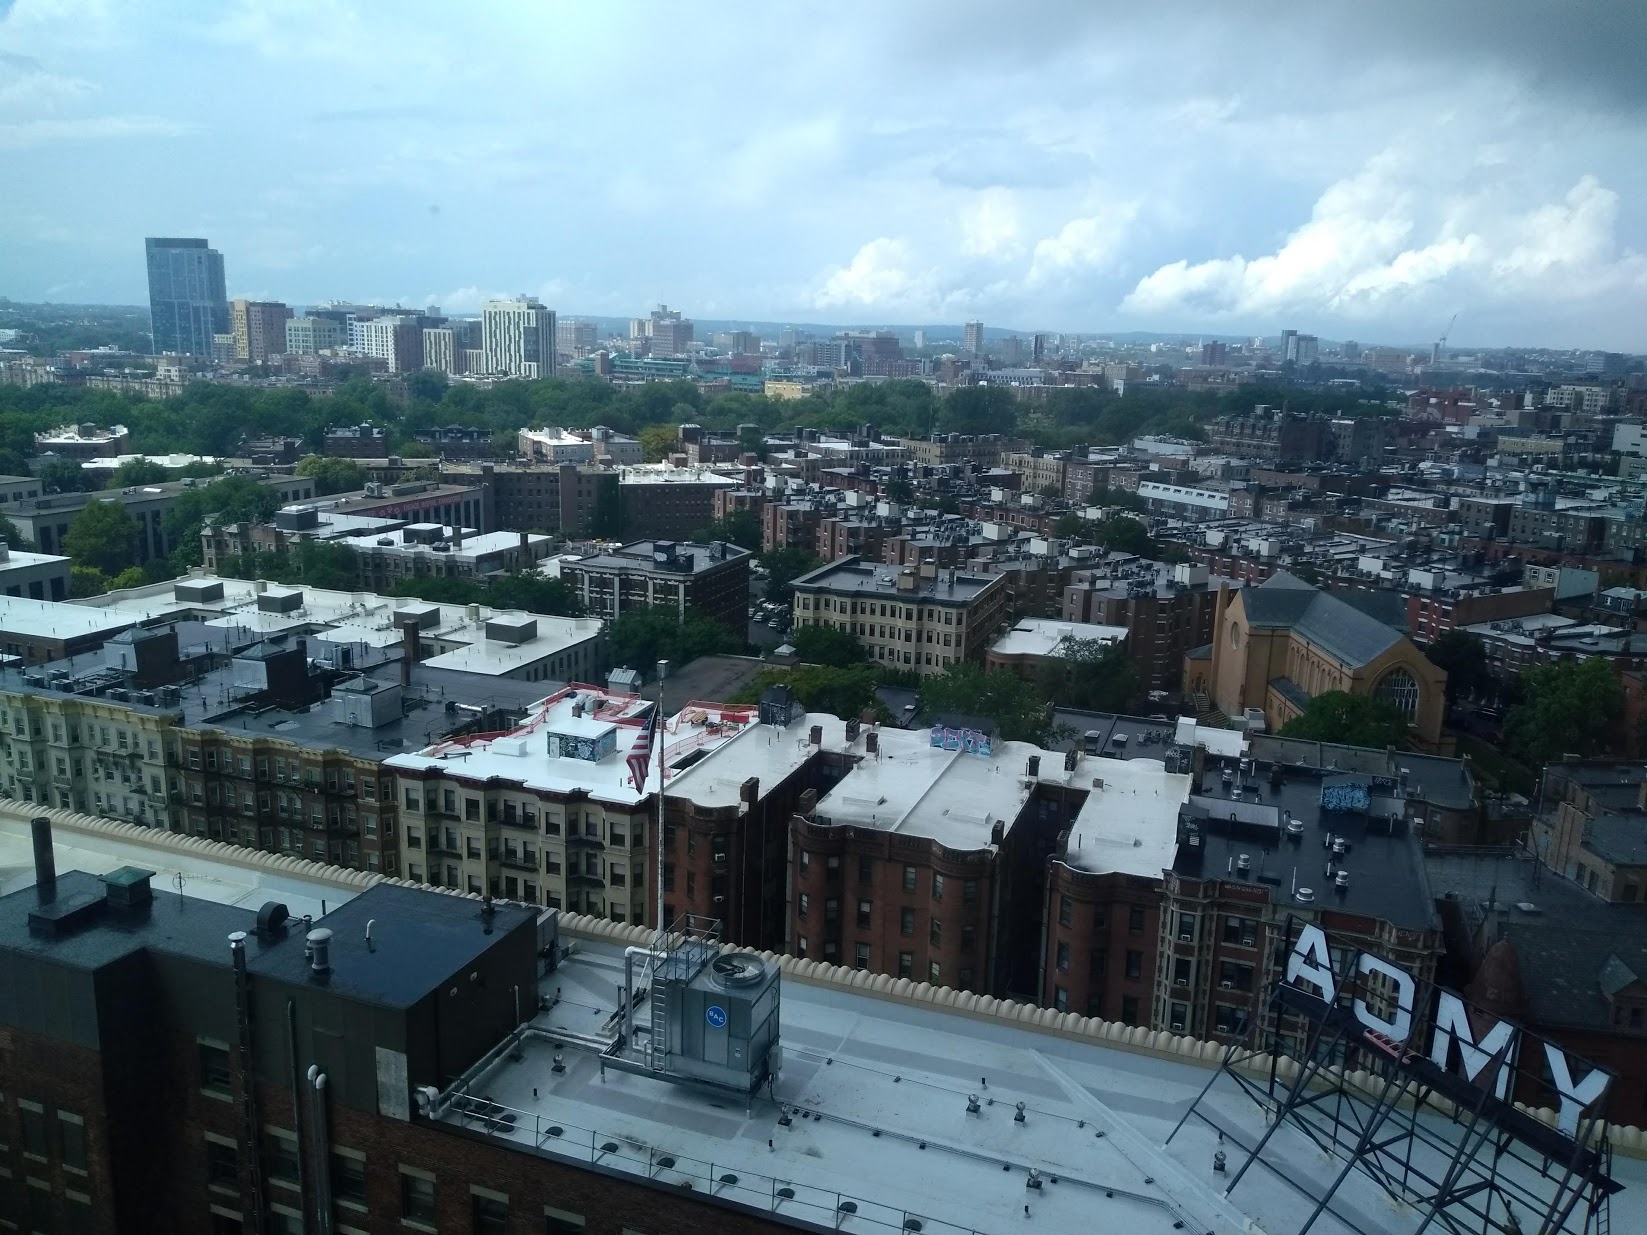 Picture: A view of Boston from the author’s residence hall room during summer 2018. The green bleachers in the center, behind the treeline, are Fenway Park.